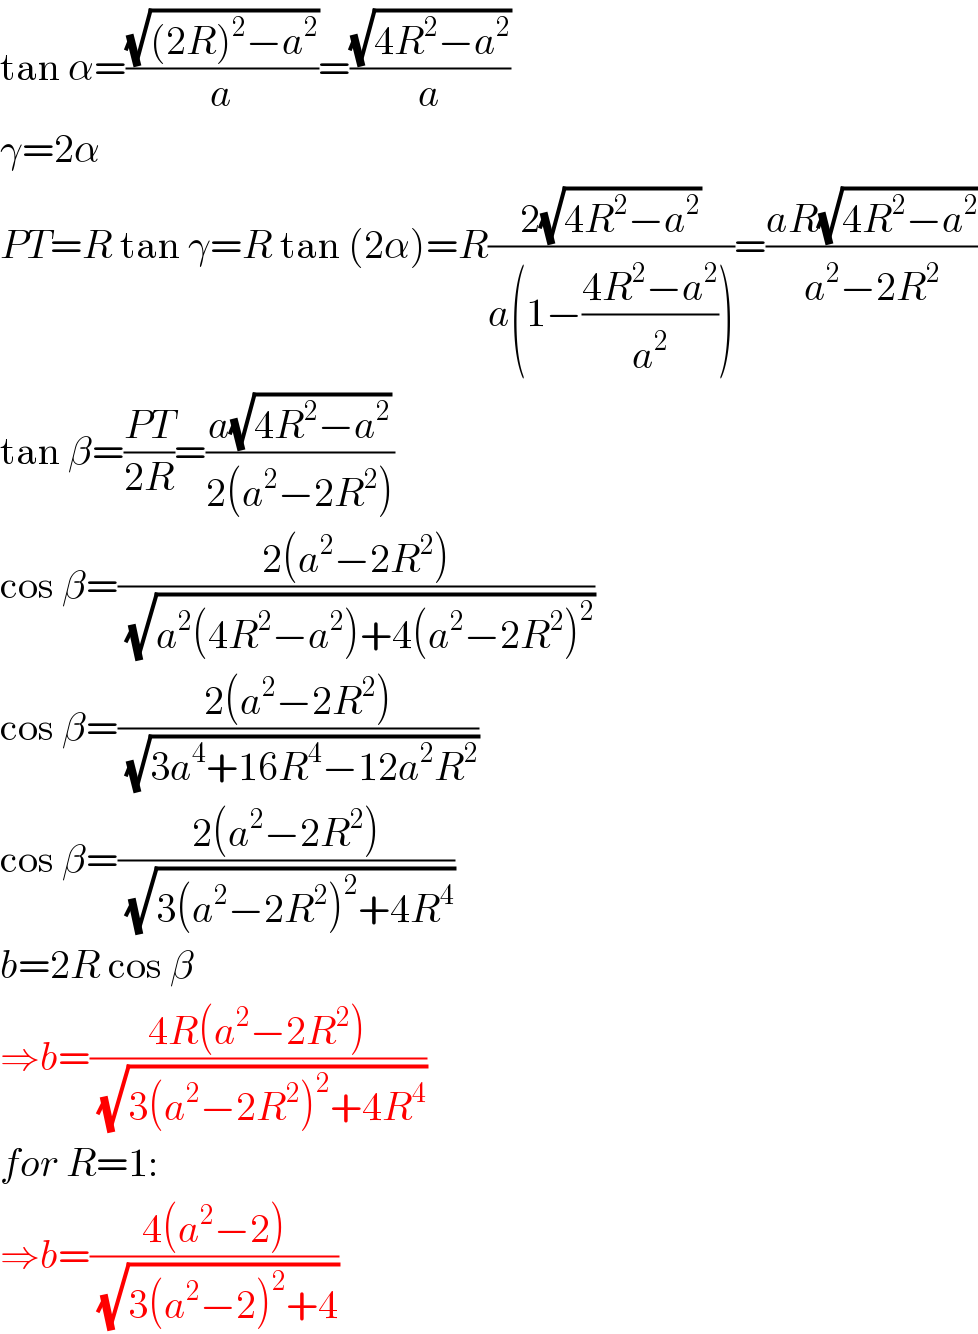 tan α=((√((2R)^2 −a^2 ))/a)=((√(4R^2 −a^2 ))/a)  γ=2α  PT=R tan γ=R tan (2α)=R((2(√(4R^2 −a^2 )))/(a(1−((4R^2 −a^2 )/a^2 ))))=((aR(√(4R^2 −a^2 )))/(a^2 −2R^2 ))  tan β=((PT)/(2R))=((a(√(4R^2 −a^2 )))/(2(a^2 −2R^2 )))  cos β=((2(a^2 −2R^2 ))/(√(a^2 (4R^2 −a^2 )+4(a^2 −2R^2 )^2 )))  cos β=((2(a^2 −2R^2 ))/(√(3a^4 +16R^4 −12a^2 R^2 )))  cos β=((2(a^2 −2R^2 ))/(√(3(a^2 −2R^2 )^2 +4R^4 )))  b=2R cos β  ⇒b=((4R(a^2 −2R^2 ))/(√(3(a^2 −2R^2 )^2 +4R^4 )))  for R=1:  ⇒b=((4(a^2 −2))/(√(3(a^2 −2)^2 +4)))  